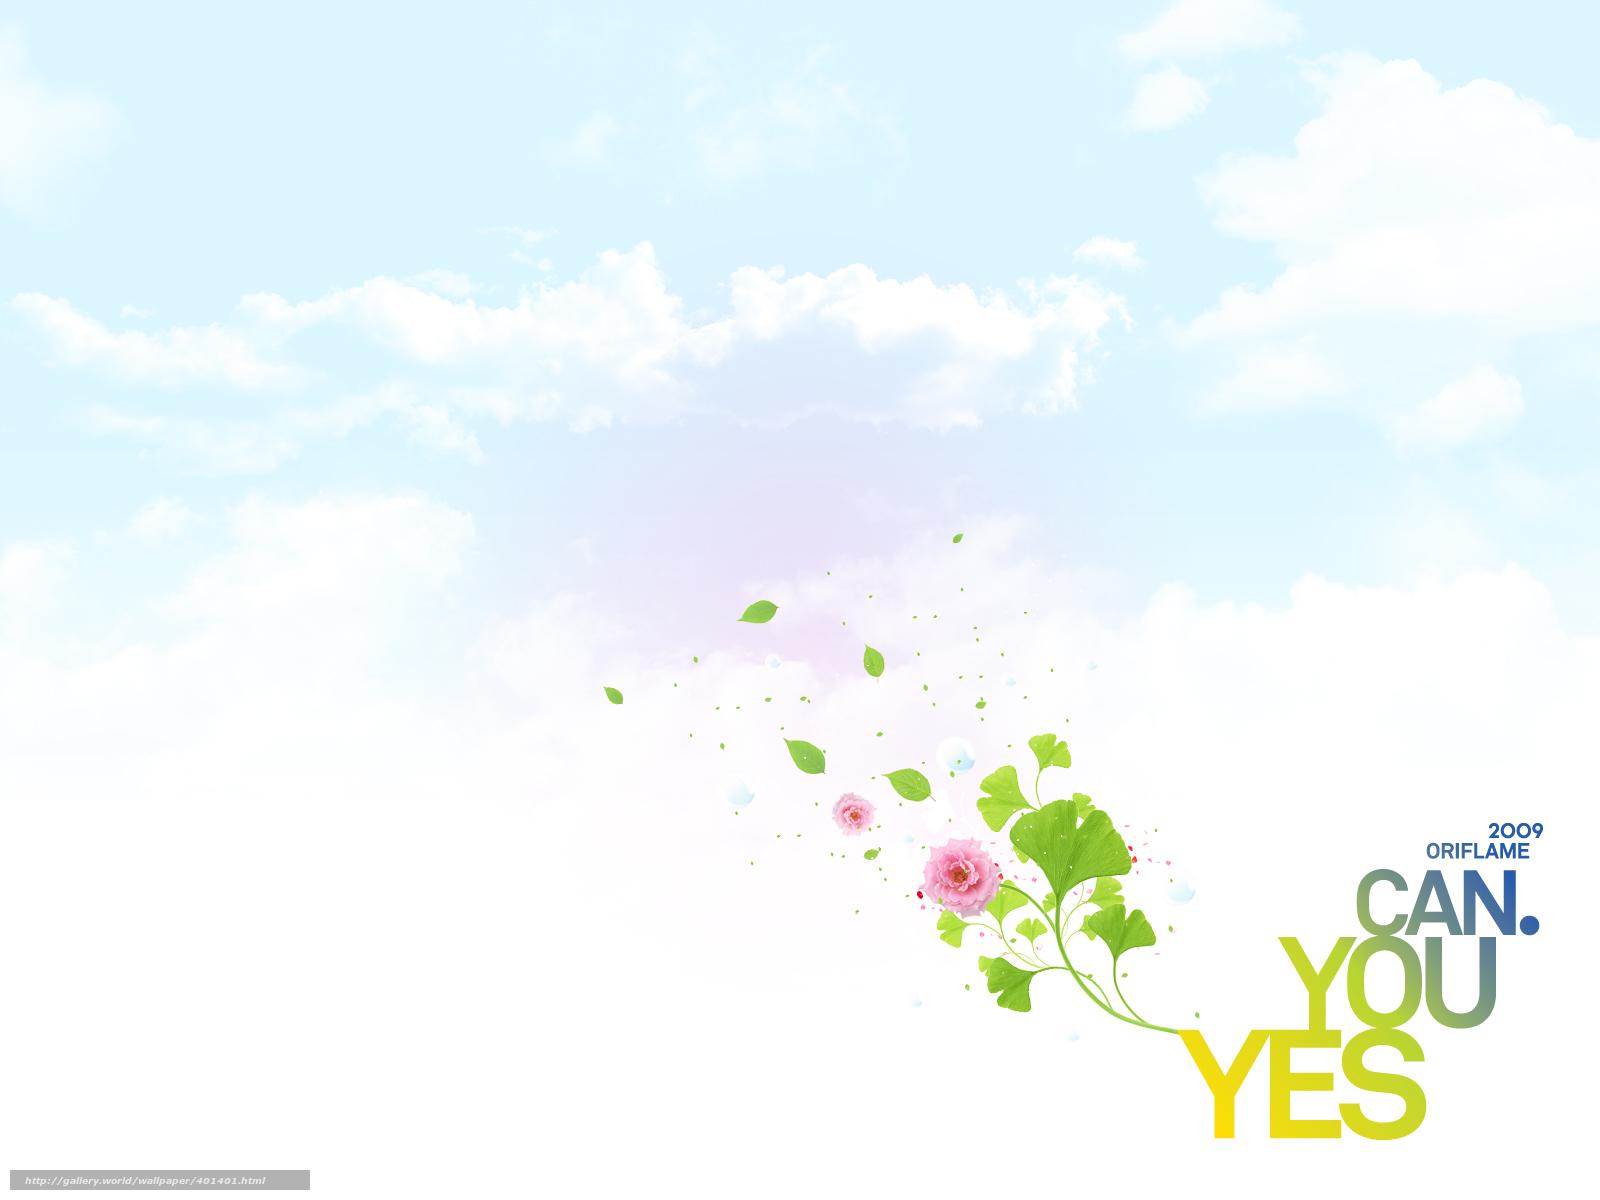 Download wallpaper yes you can, yes you can, logo, oriflame